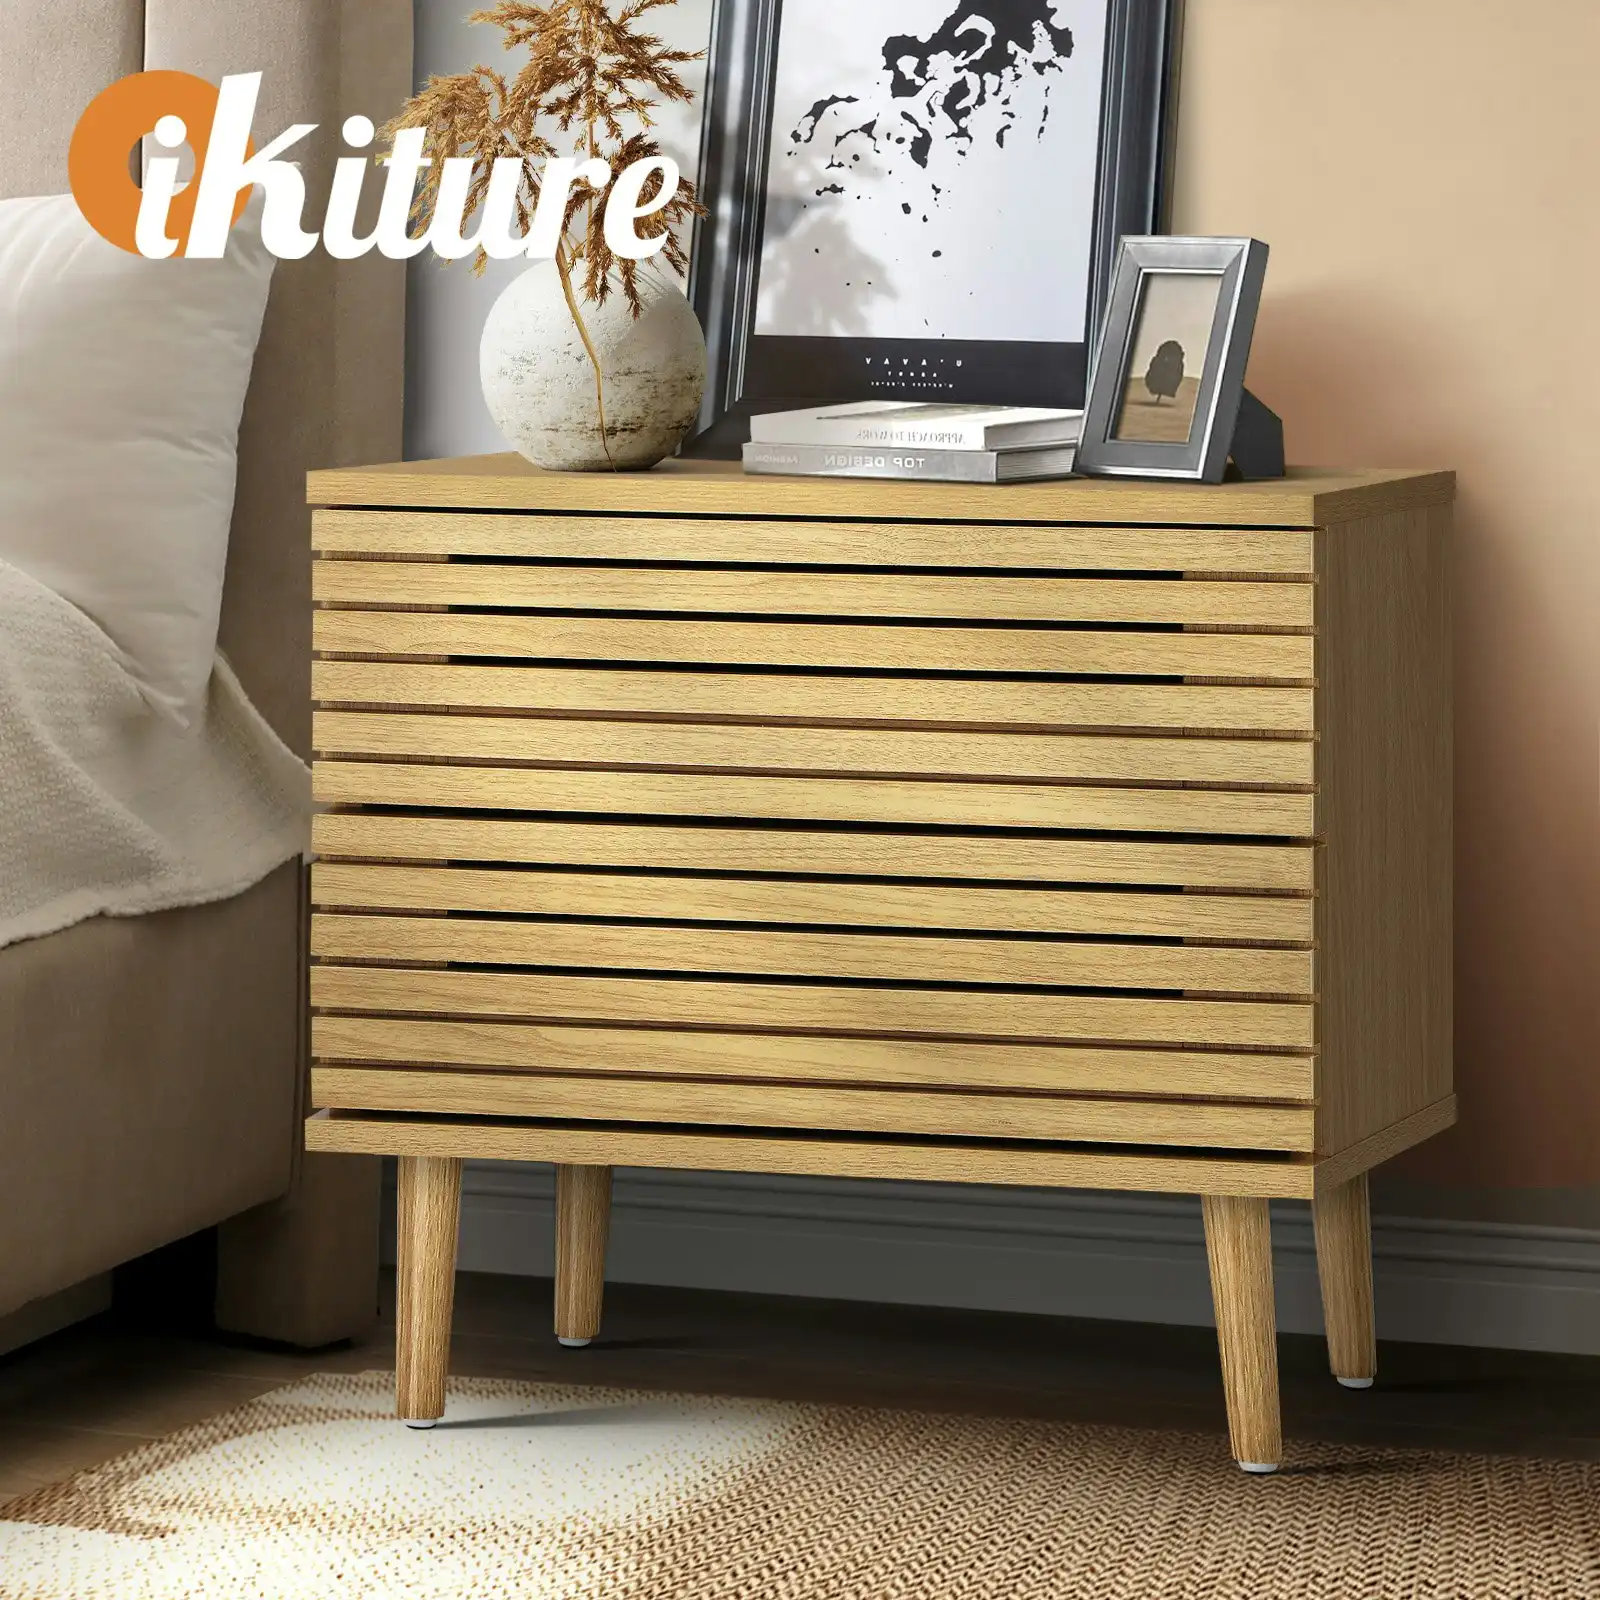 Oikiture Bedside Tables Side Table 2 Drawers Unique Bedroom Storage Cabinet